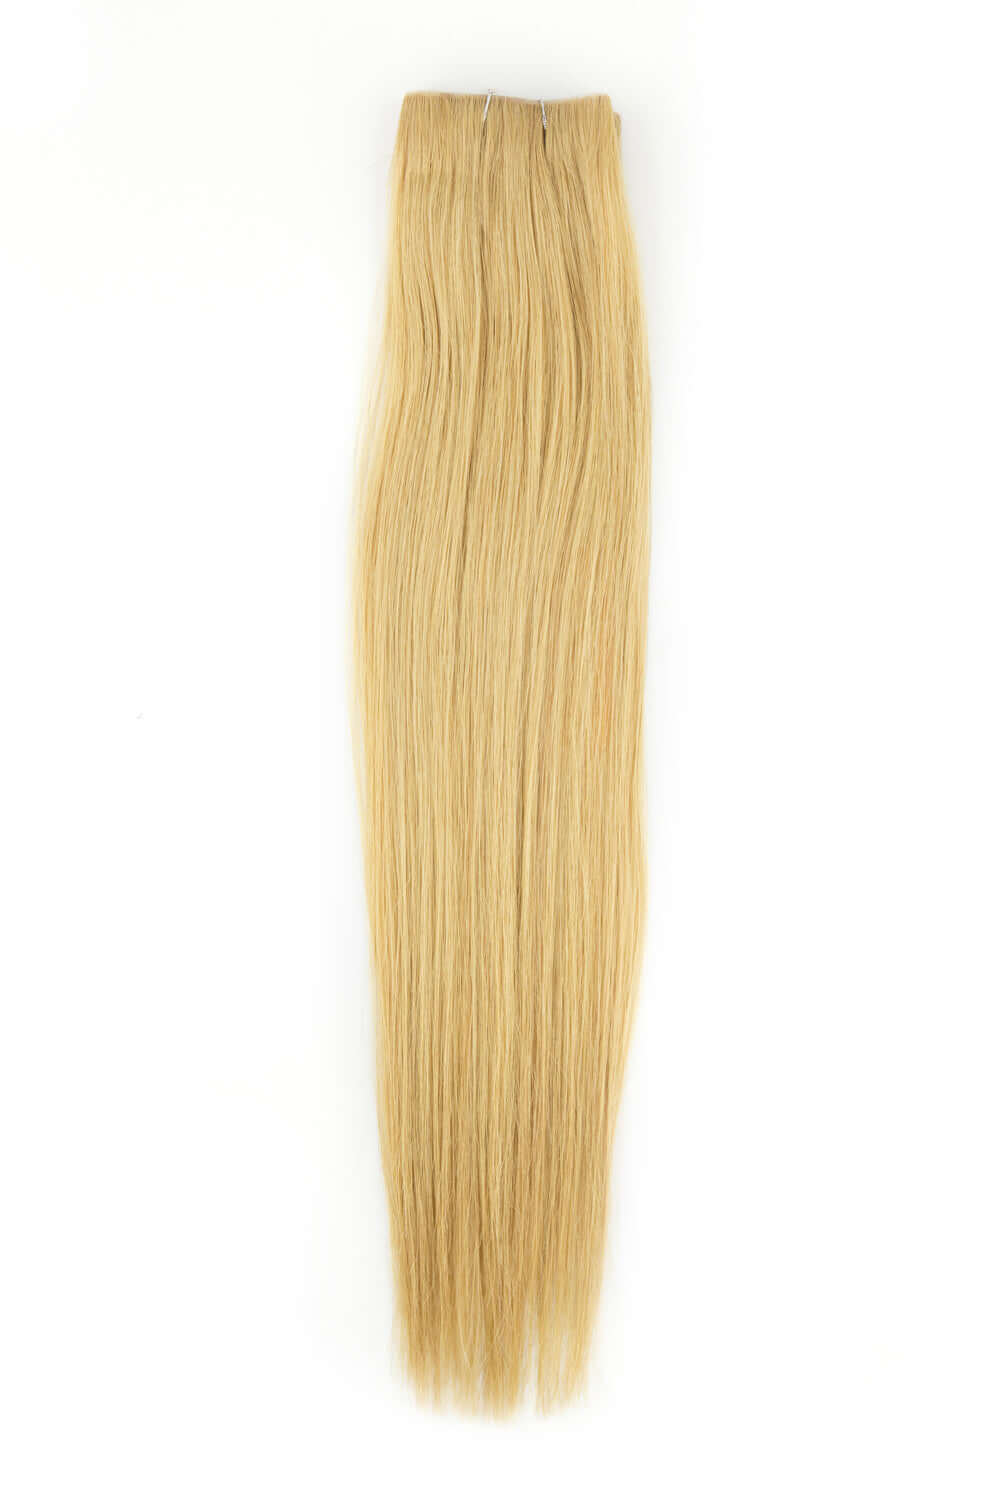 HAND TIED SKIN WEFT CLIP IN - SILKY STRAIGHT | FINAL SALE